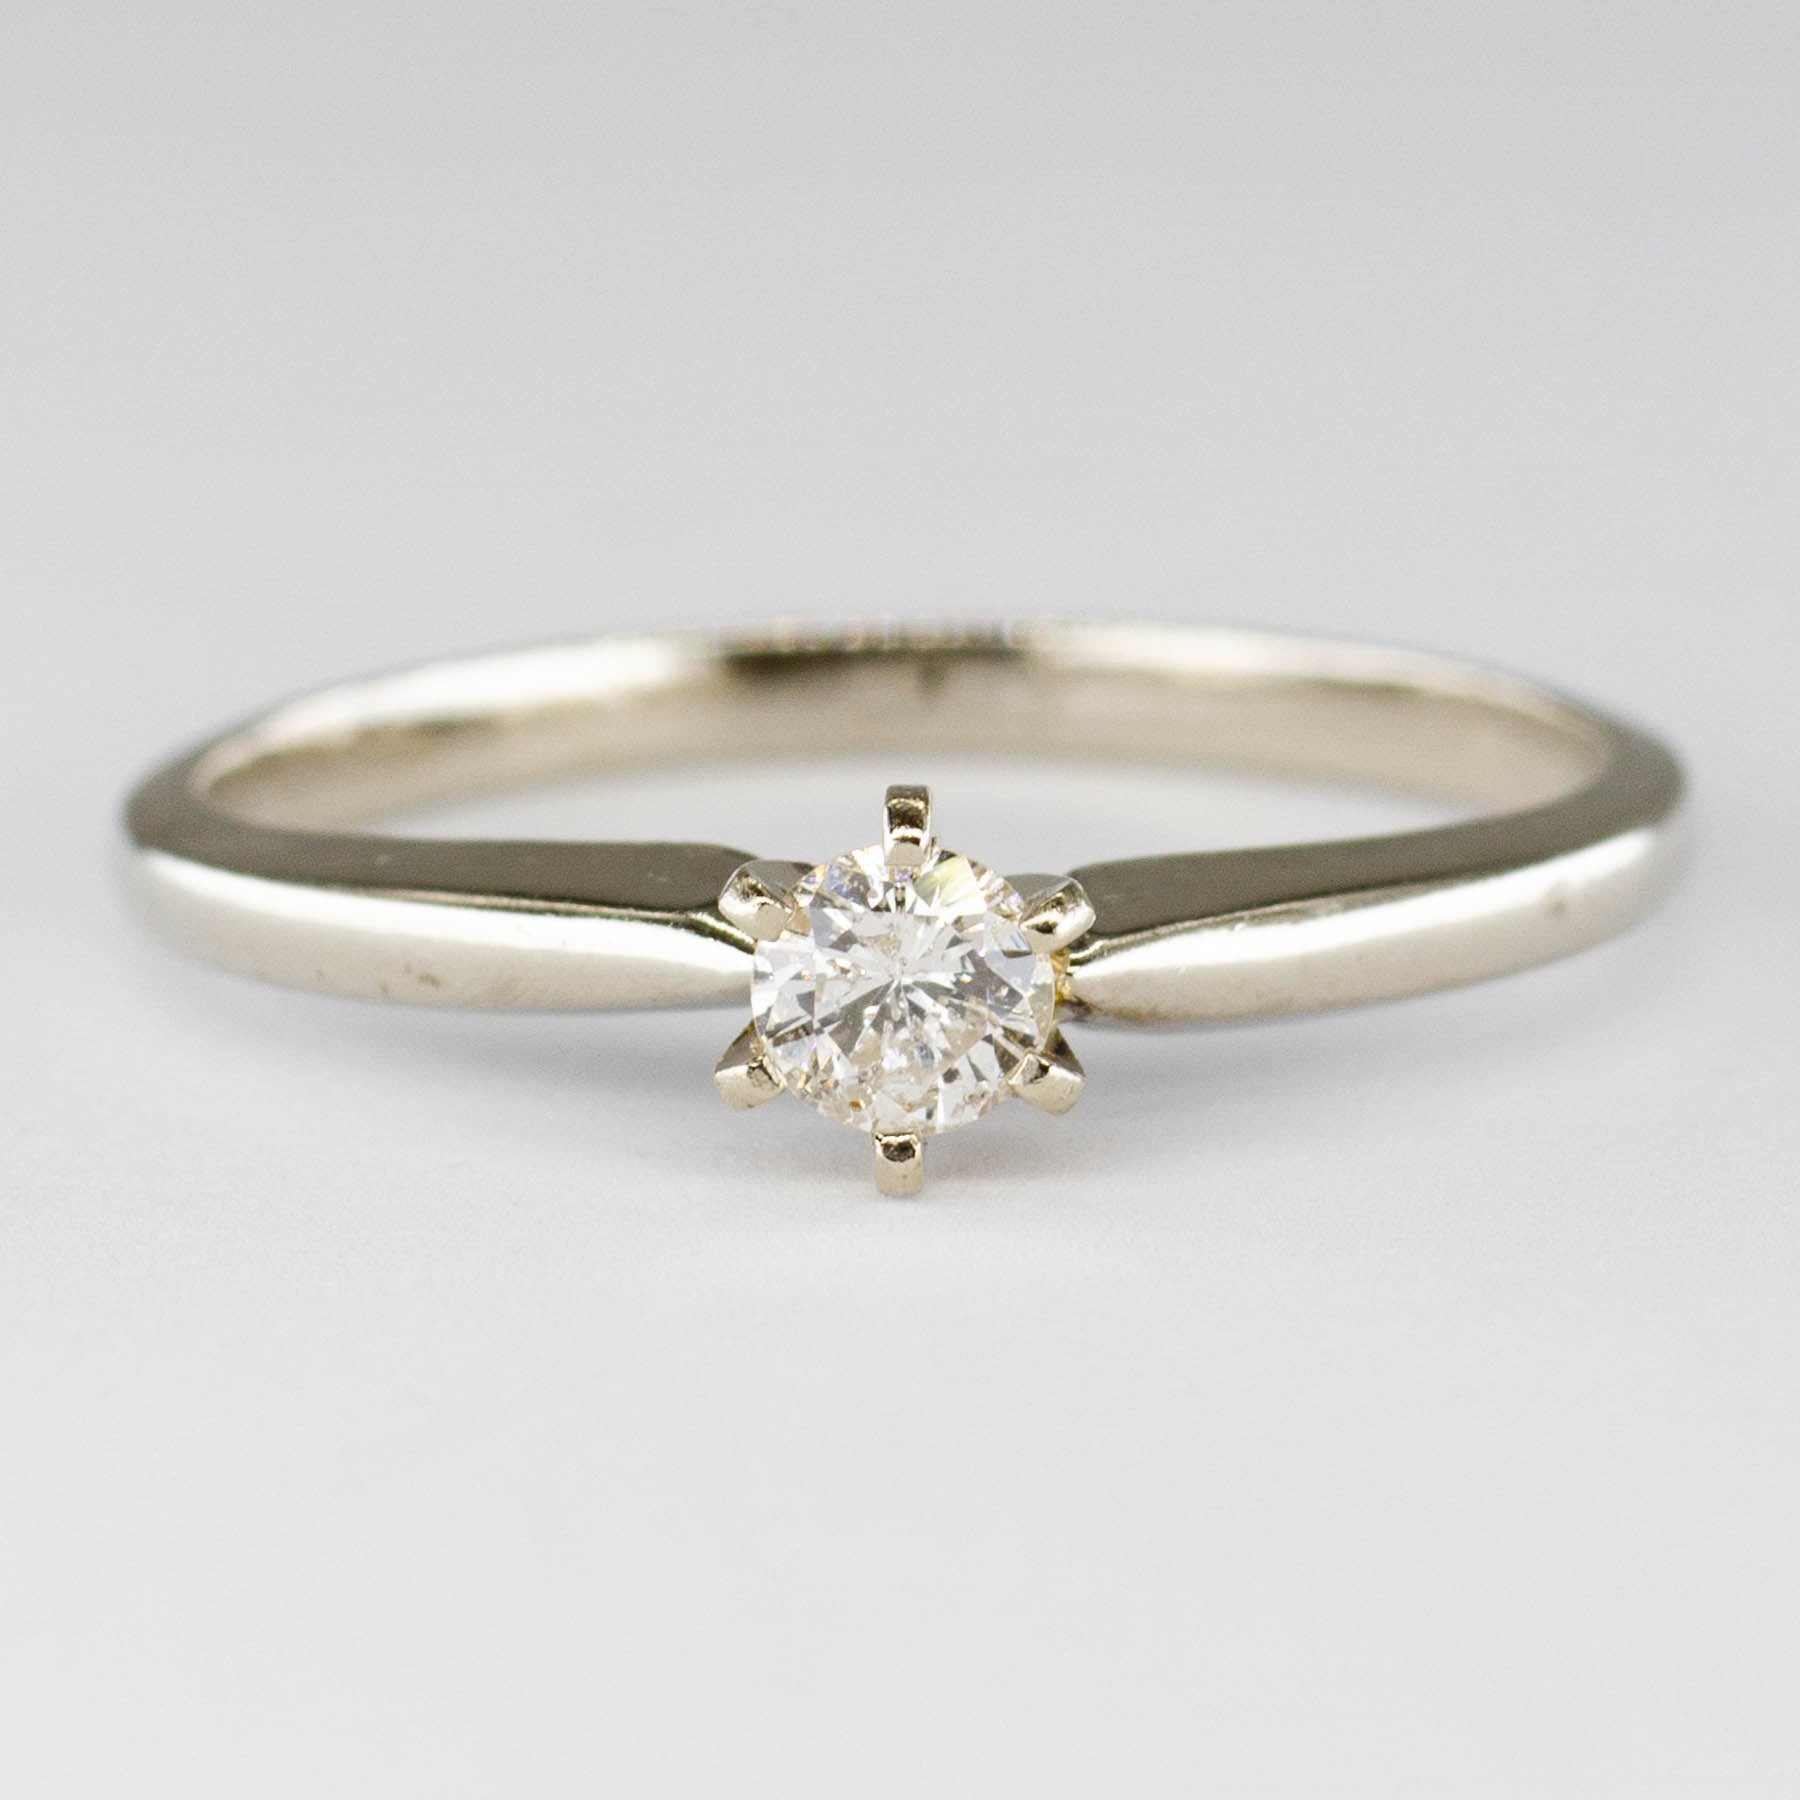 Six Prong Solitaire Diamond Ring | 0.17ct | SZ 6.75 |